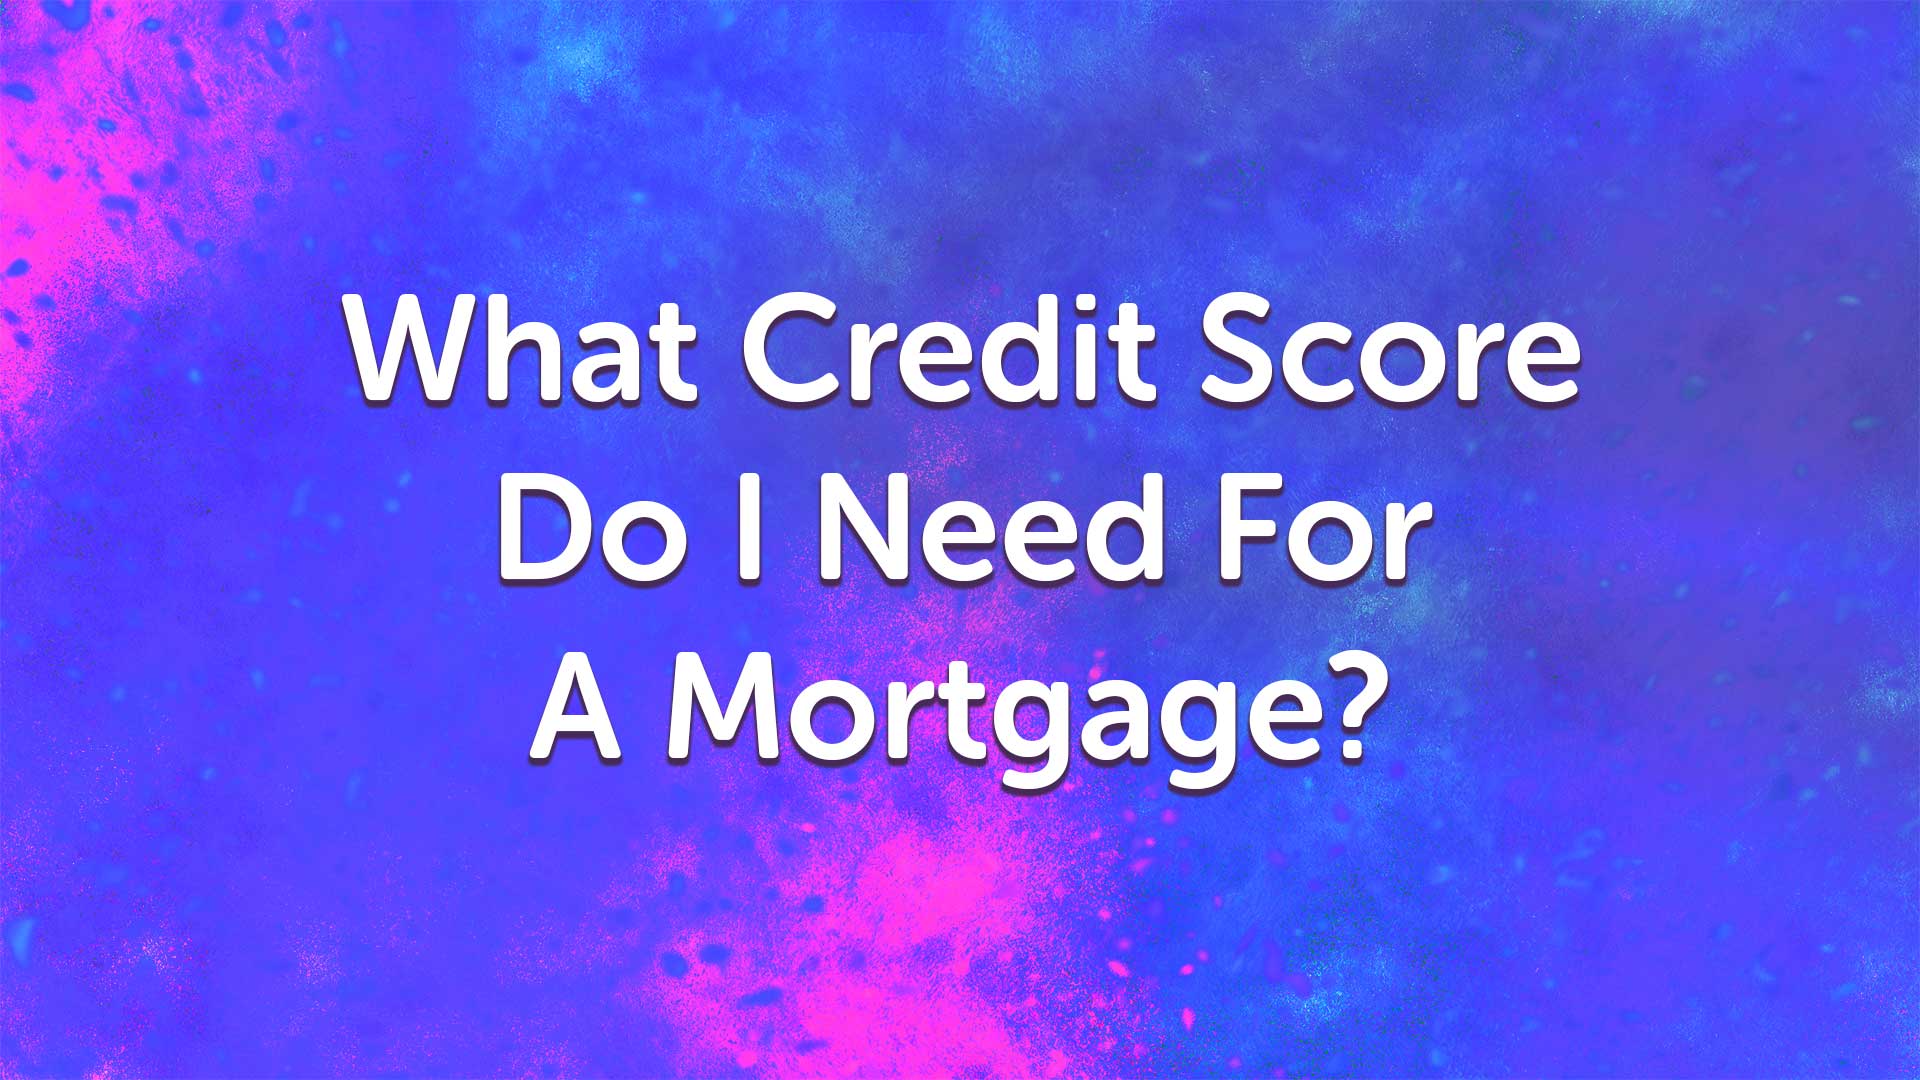 What Credit Score Do I Need for a Mortgage